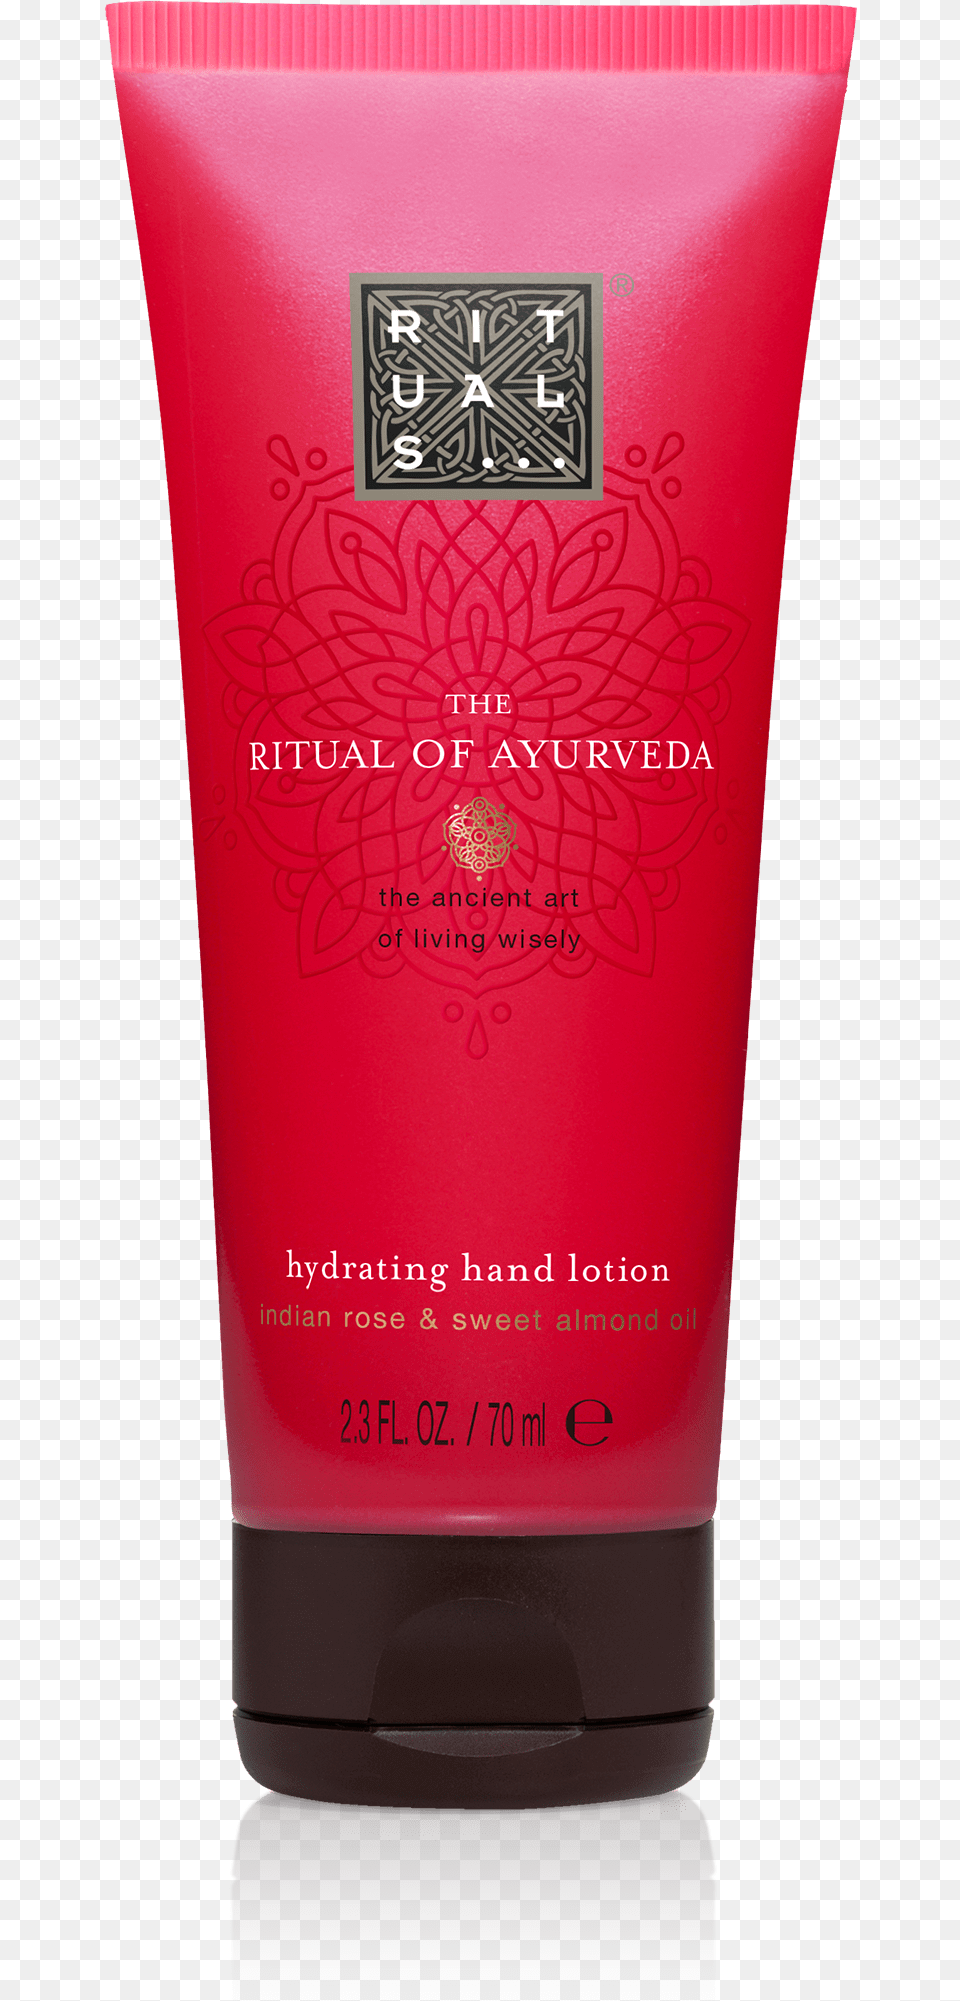 The Ritual Of Ayurveda Hand Lotion Rituals The Ritual Of Ayurveda Hand Lotion, Bottle, Cosmetics, Tape Png Image